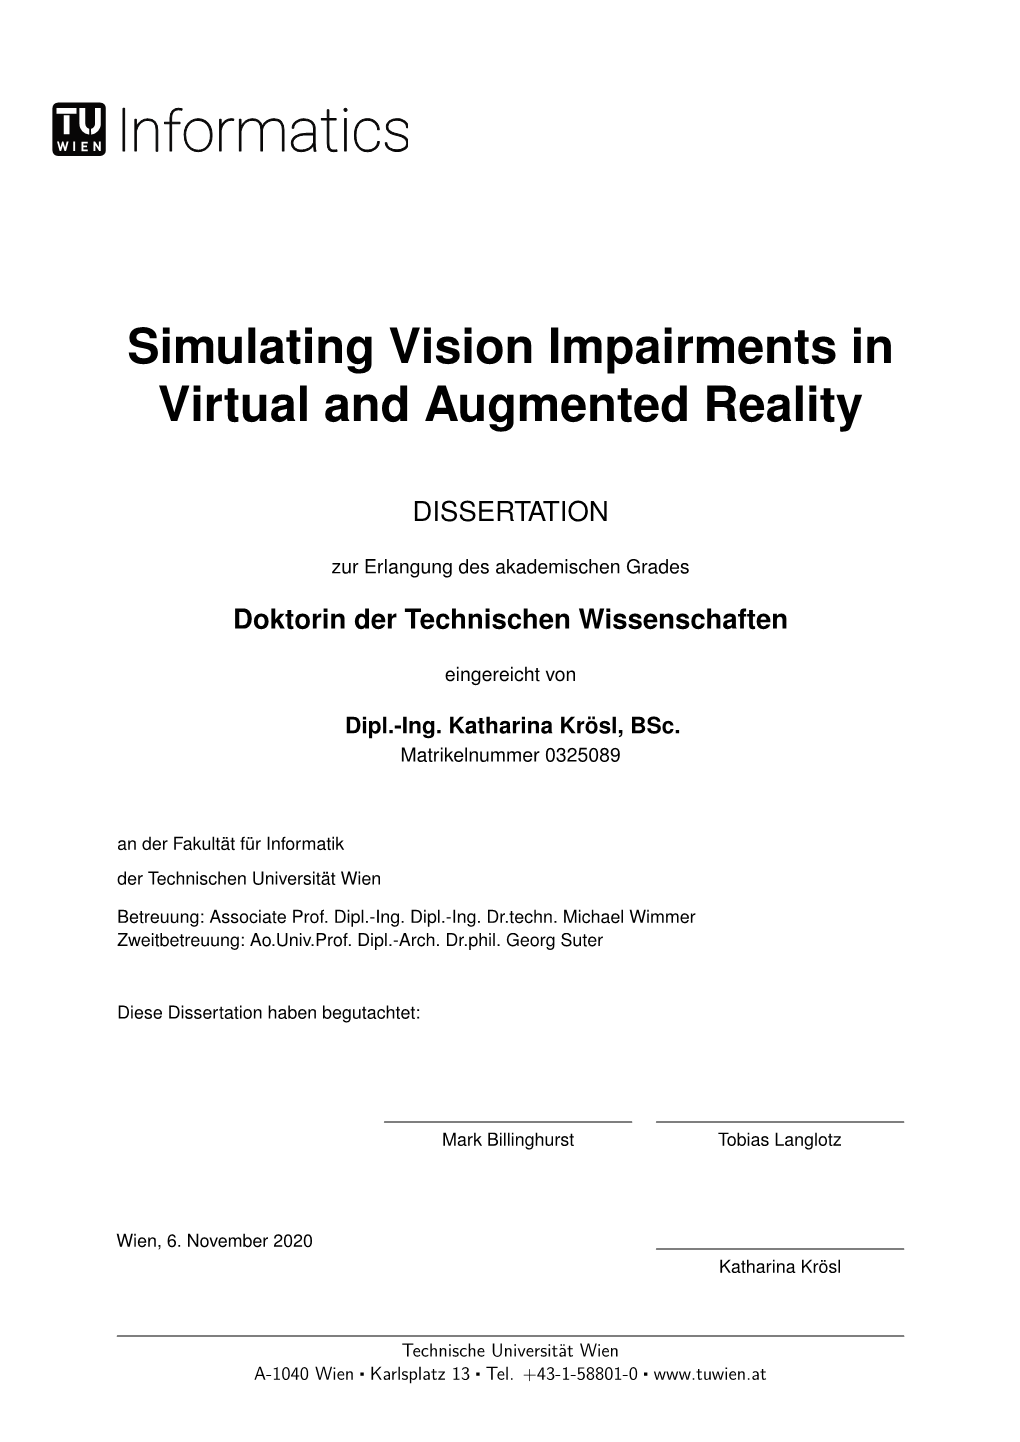 Simulating Vision Impairments in Virtual and Augmented Reality